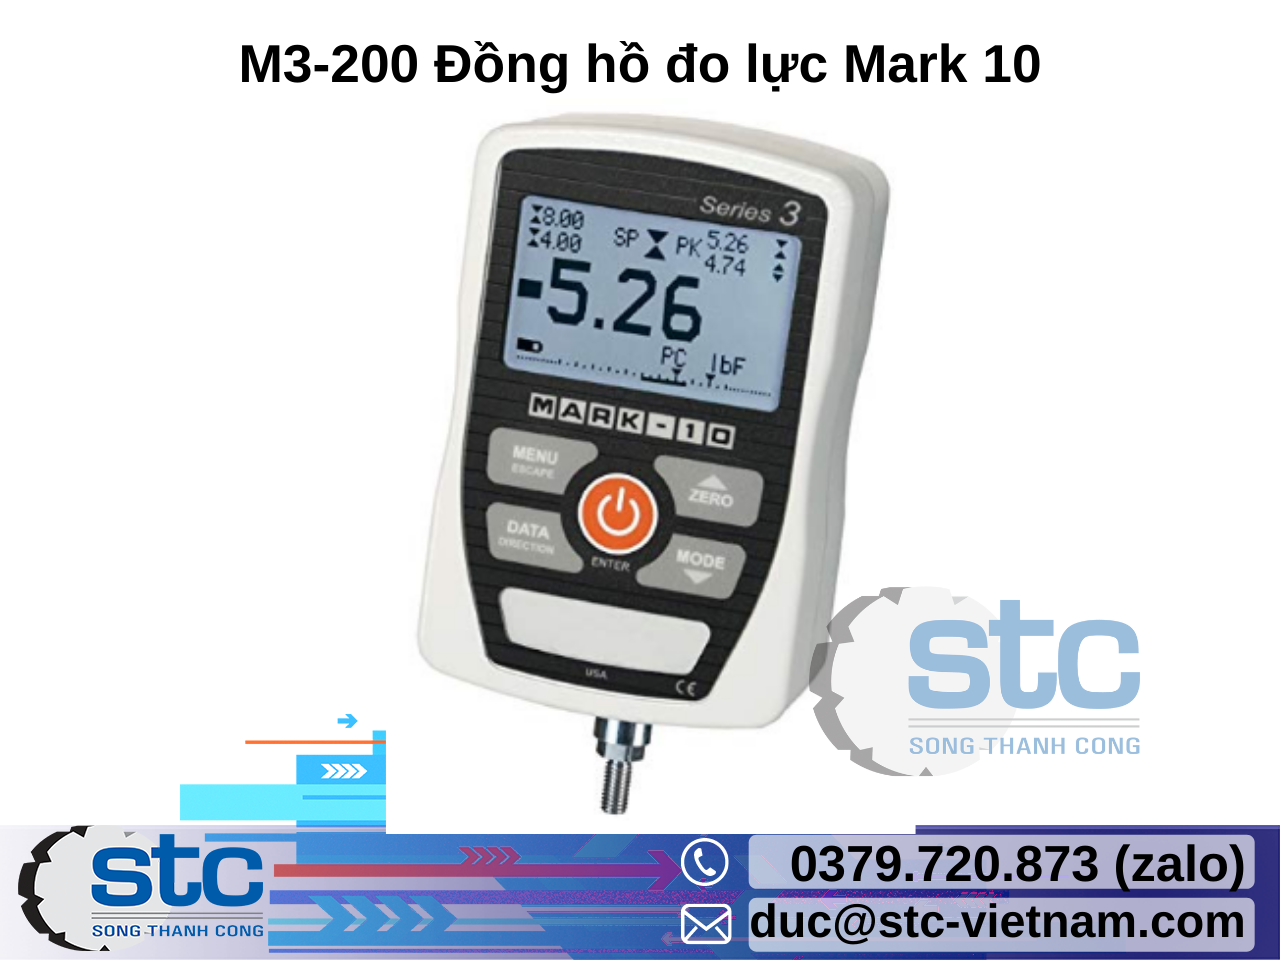 m3-200-dong-ho-do-luc-mark-10.png